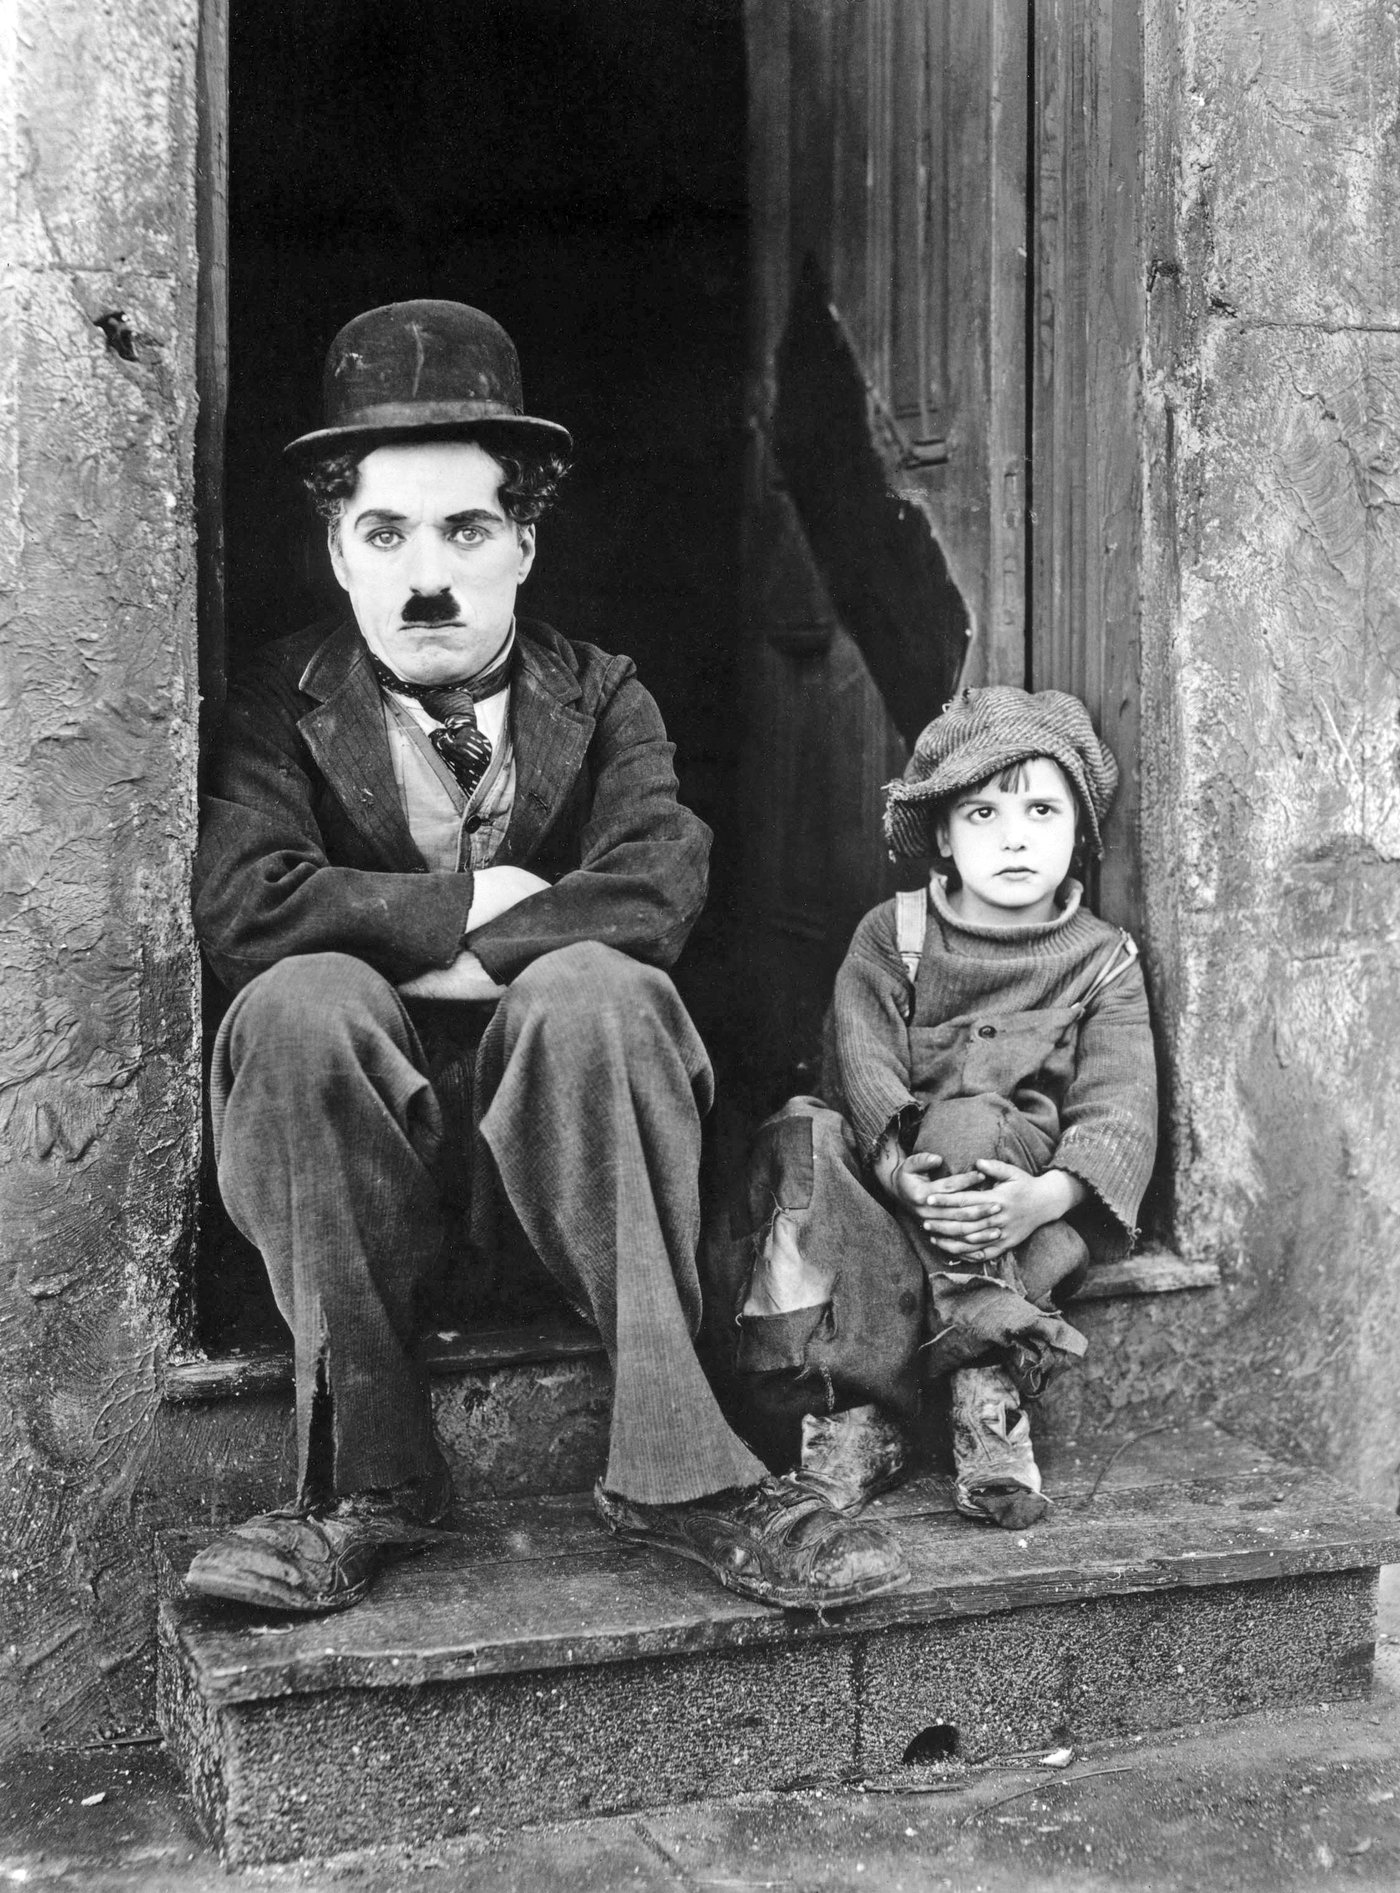 Charlie Chaplin sitting with crossed arms at a small entrance with a child